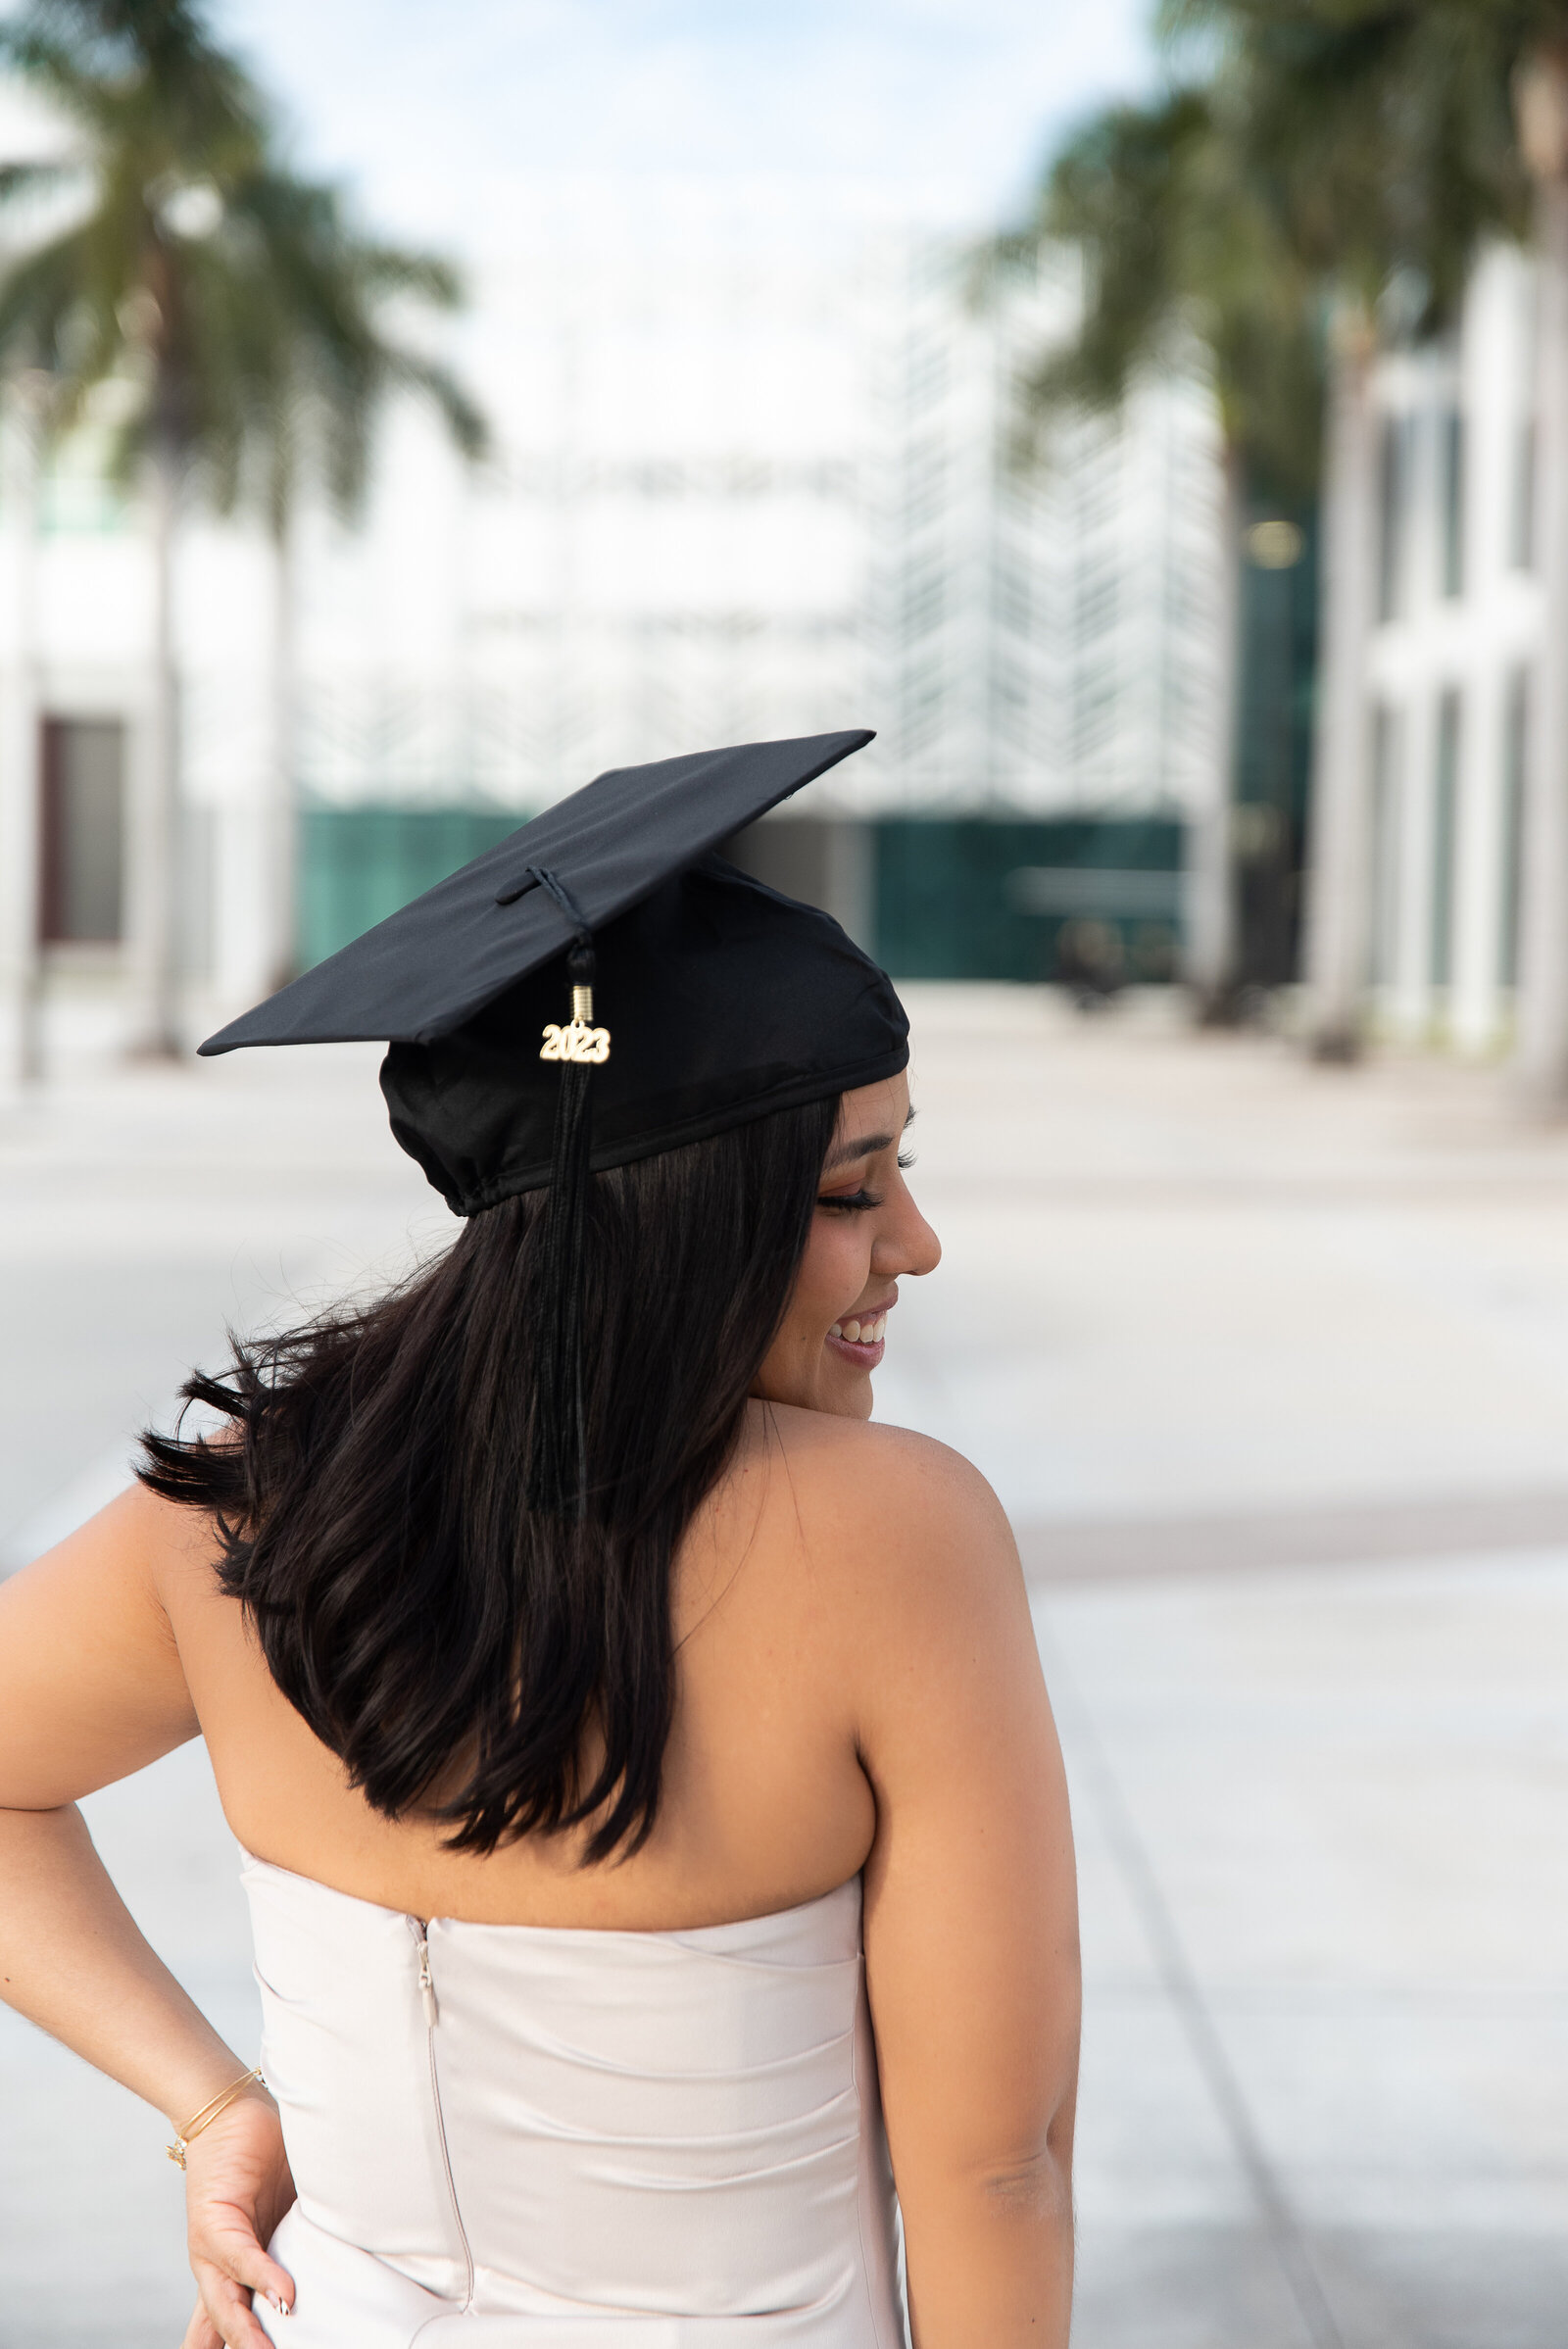 What to wear to Graduation Photoshoot